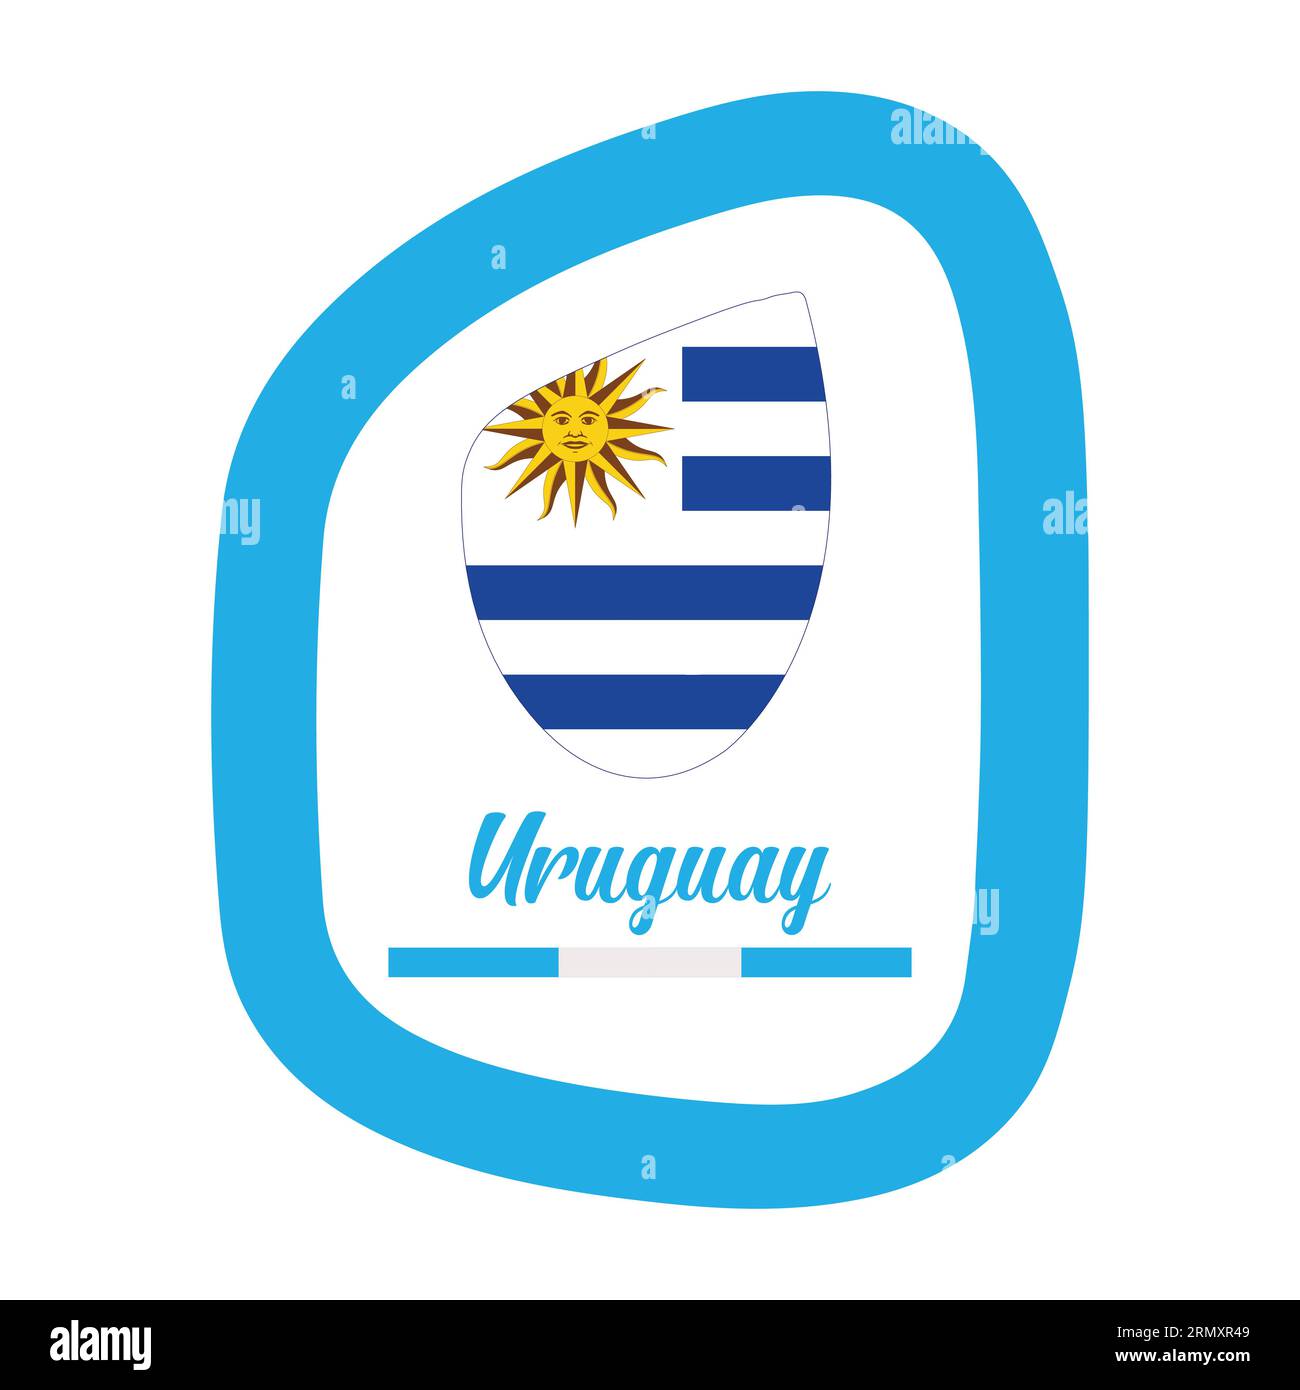 Uruguay Flag with Frame Vector Illustration Abstract Editable image Stock Vector